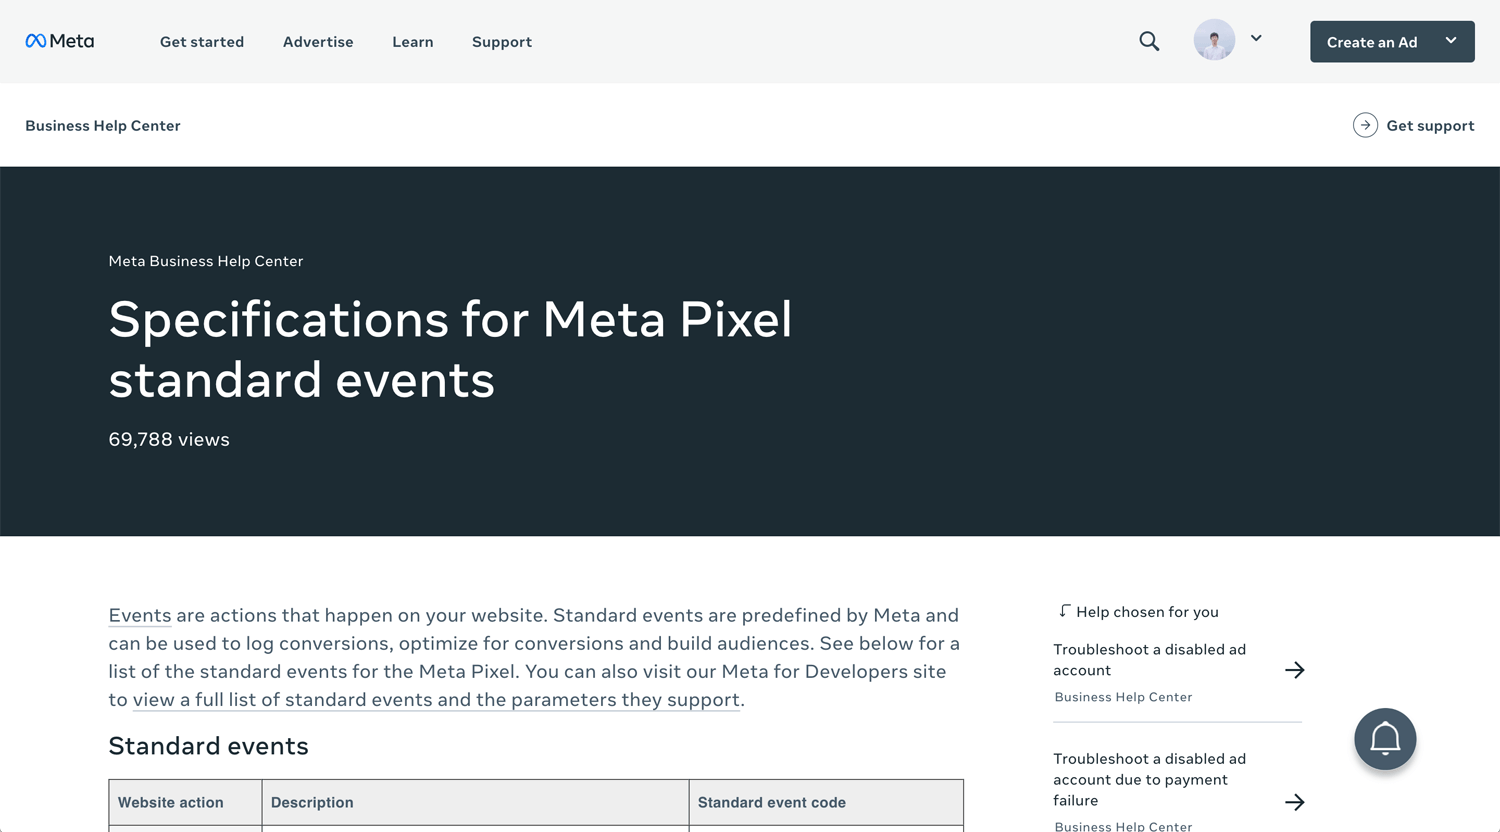 How to set up and install a Meta Pixel